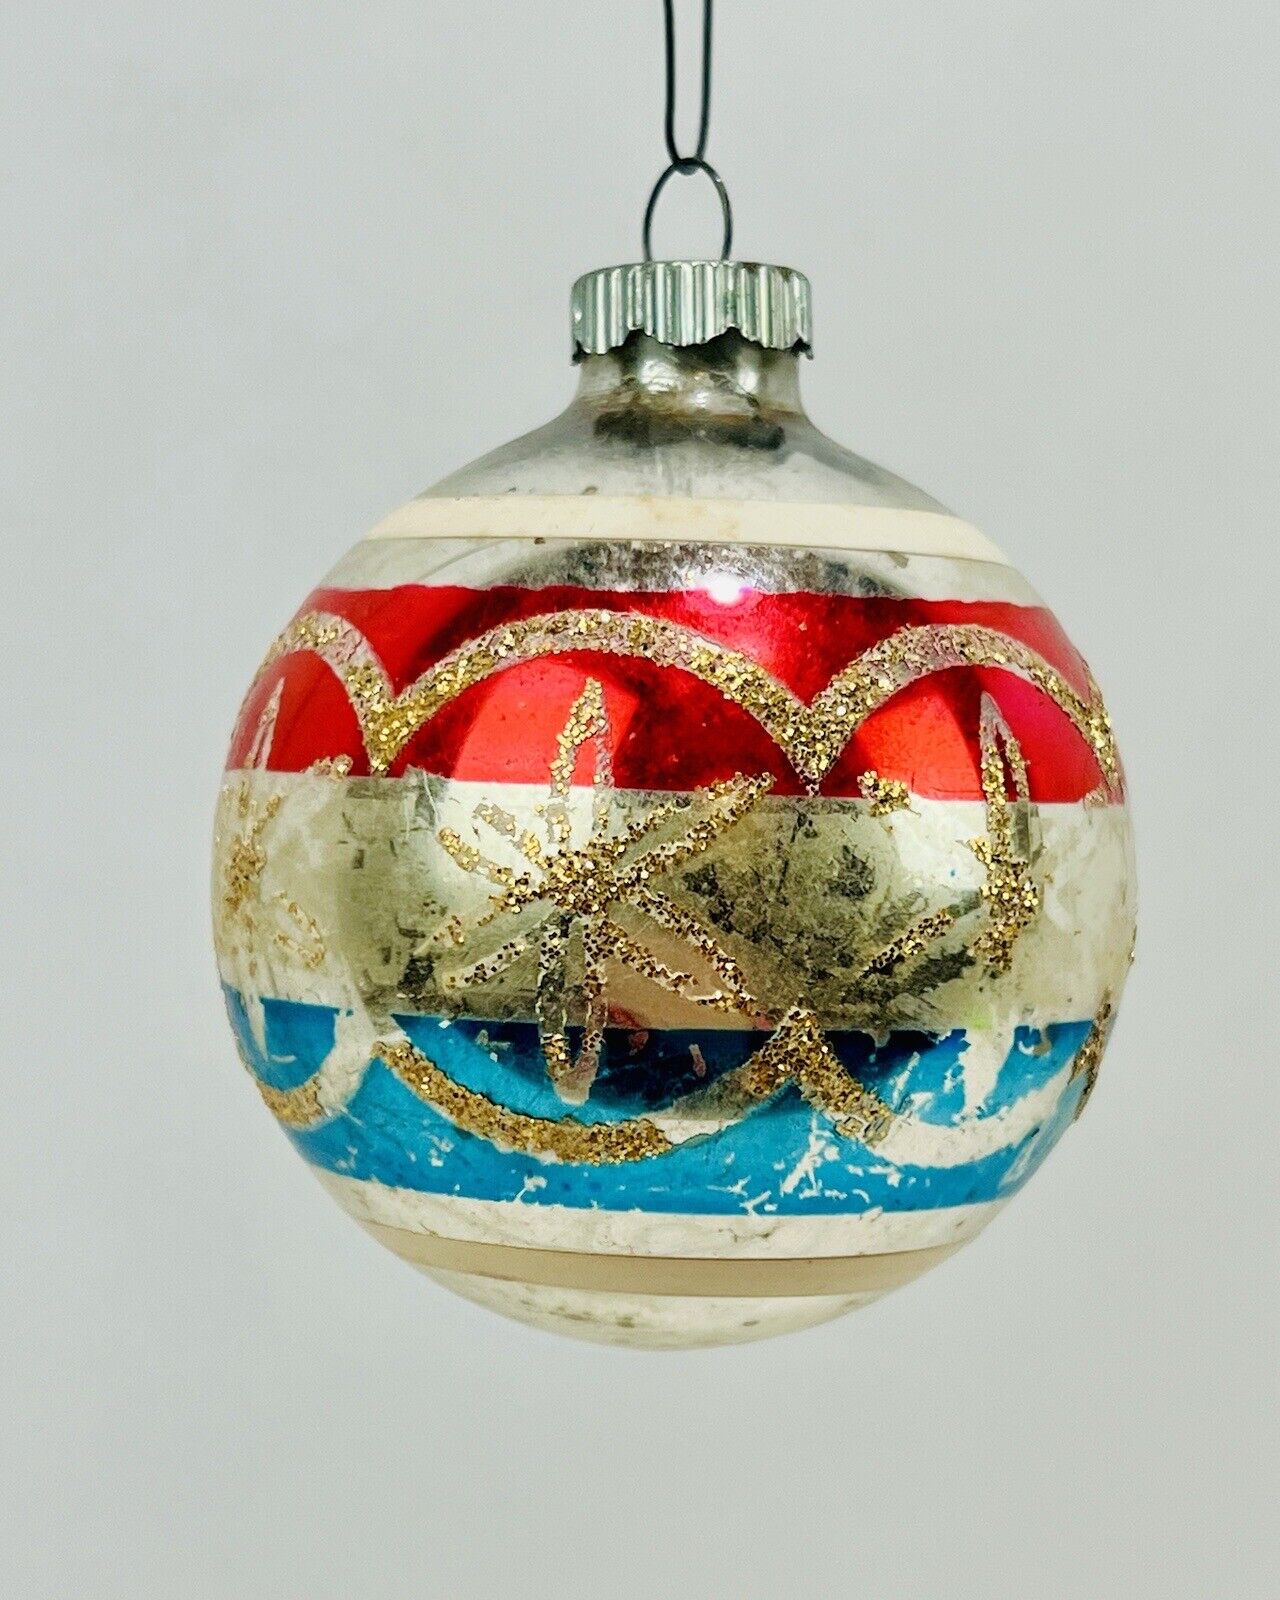 Vintage Shiny Brite Glass Ornament Patriotic Red White Blue w Gold Stars Rings